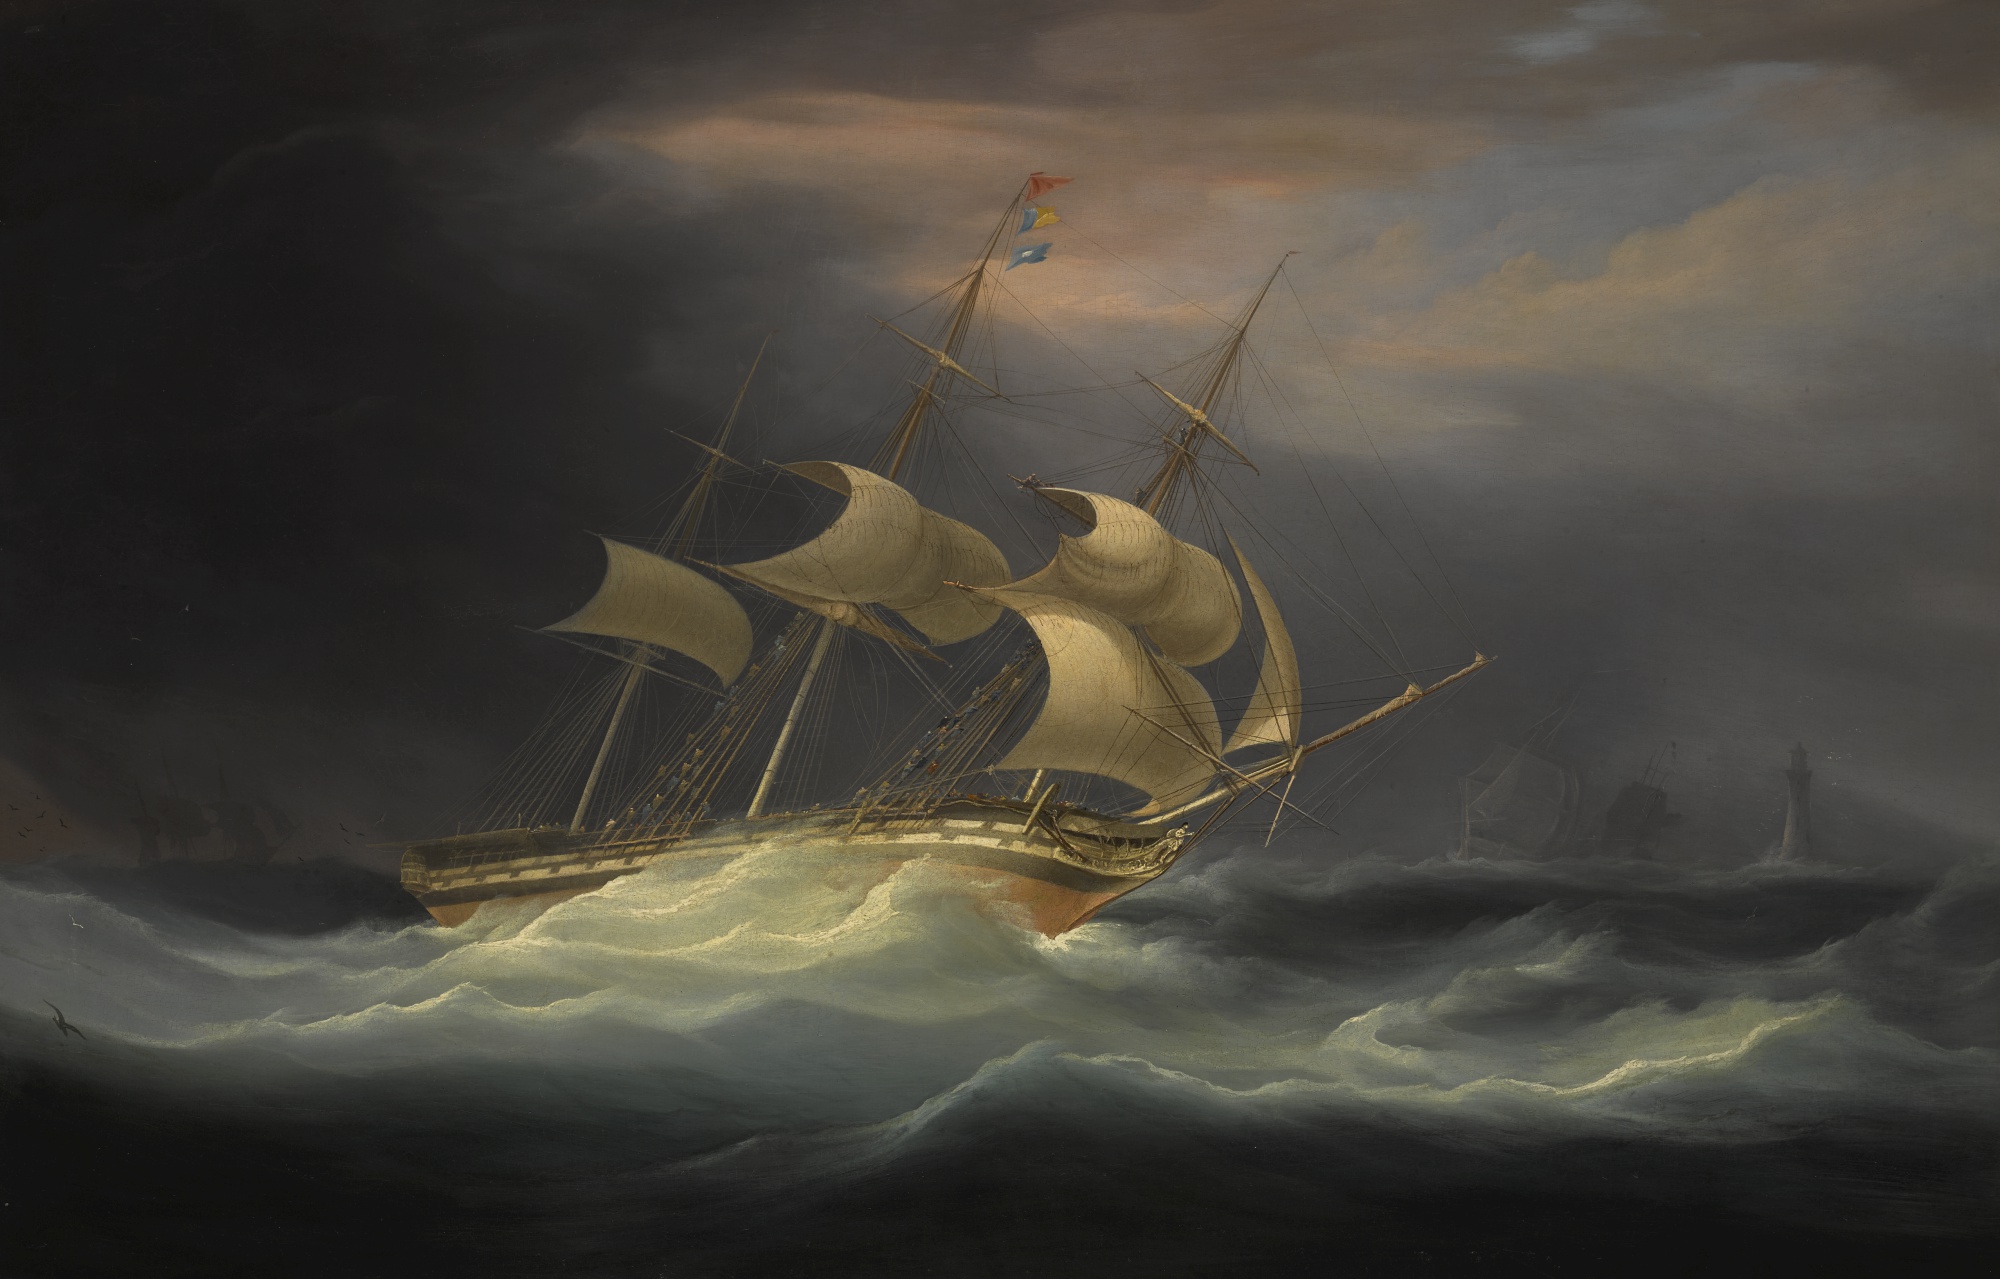 An East Indiaman in a Storm off Eddystone Lighthouse, by William John Huggins